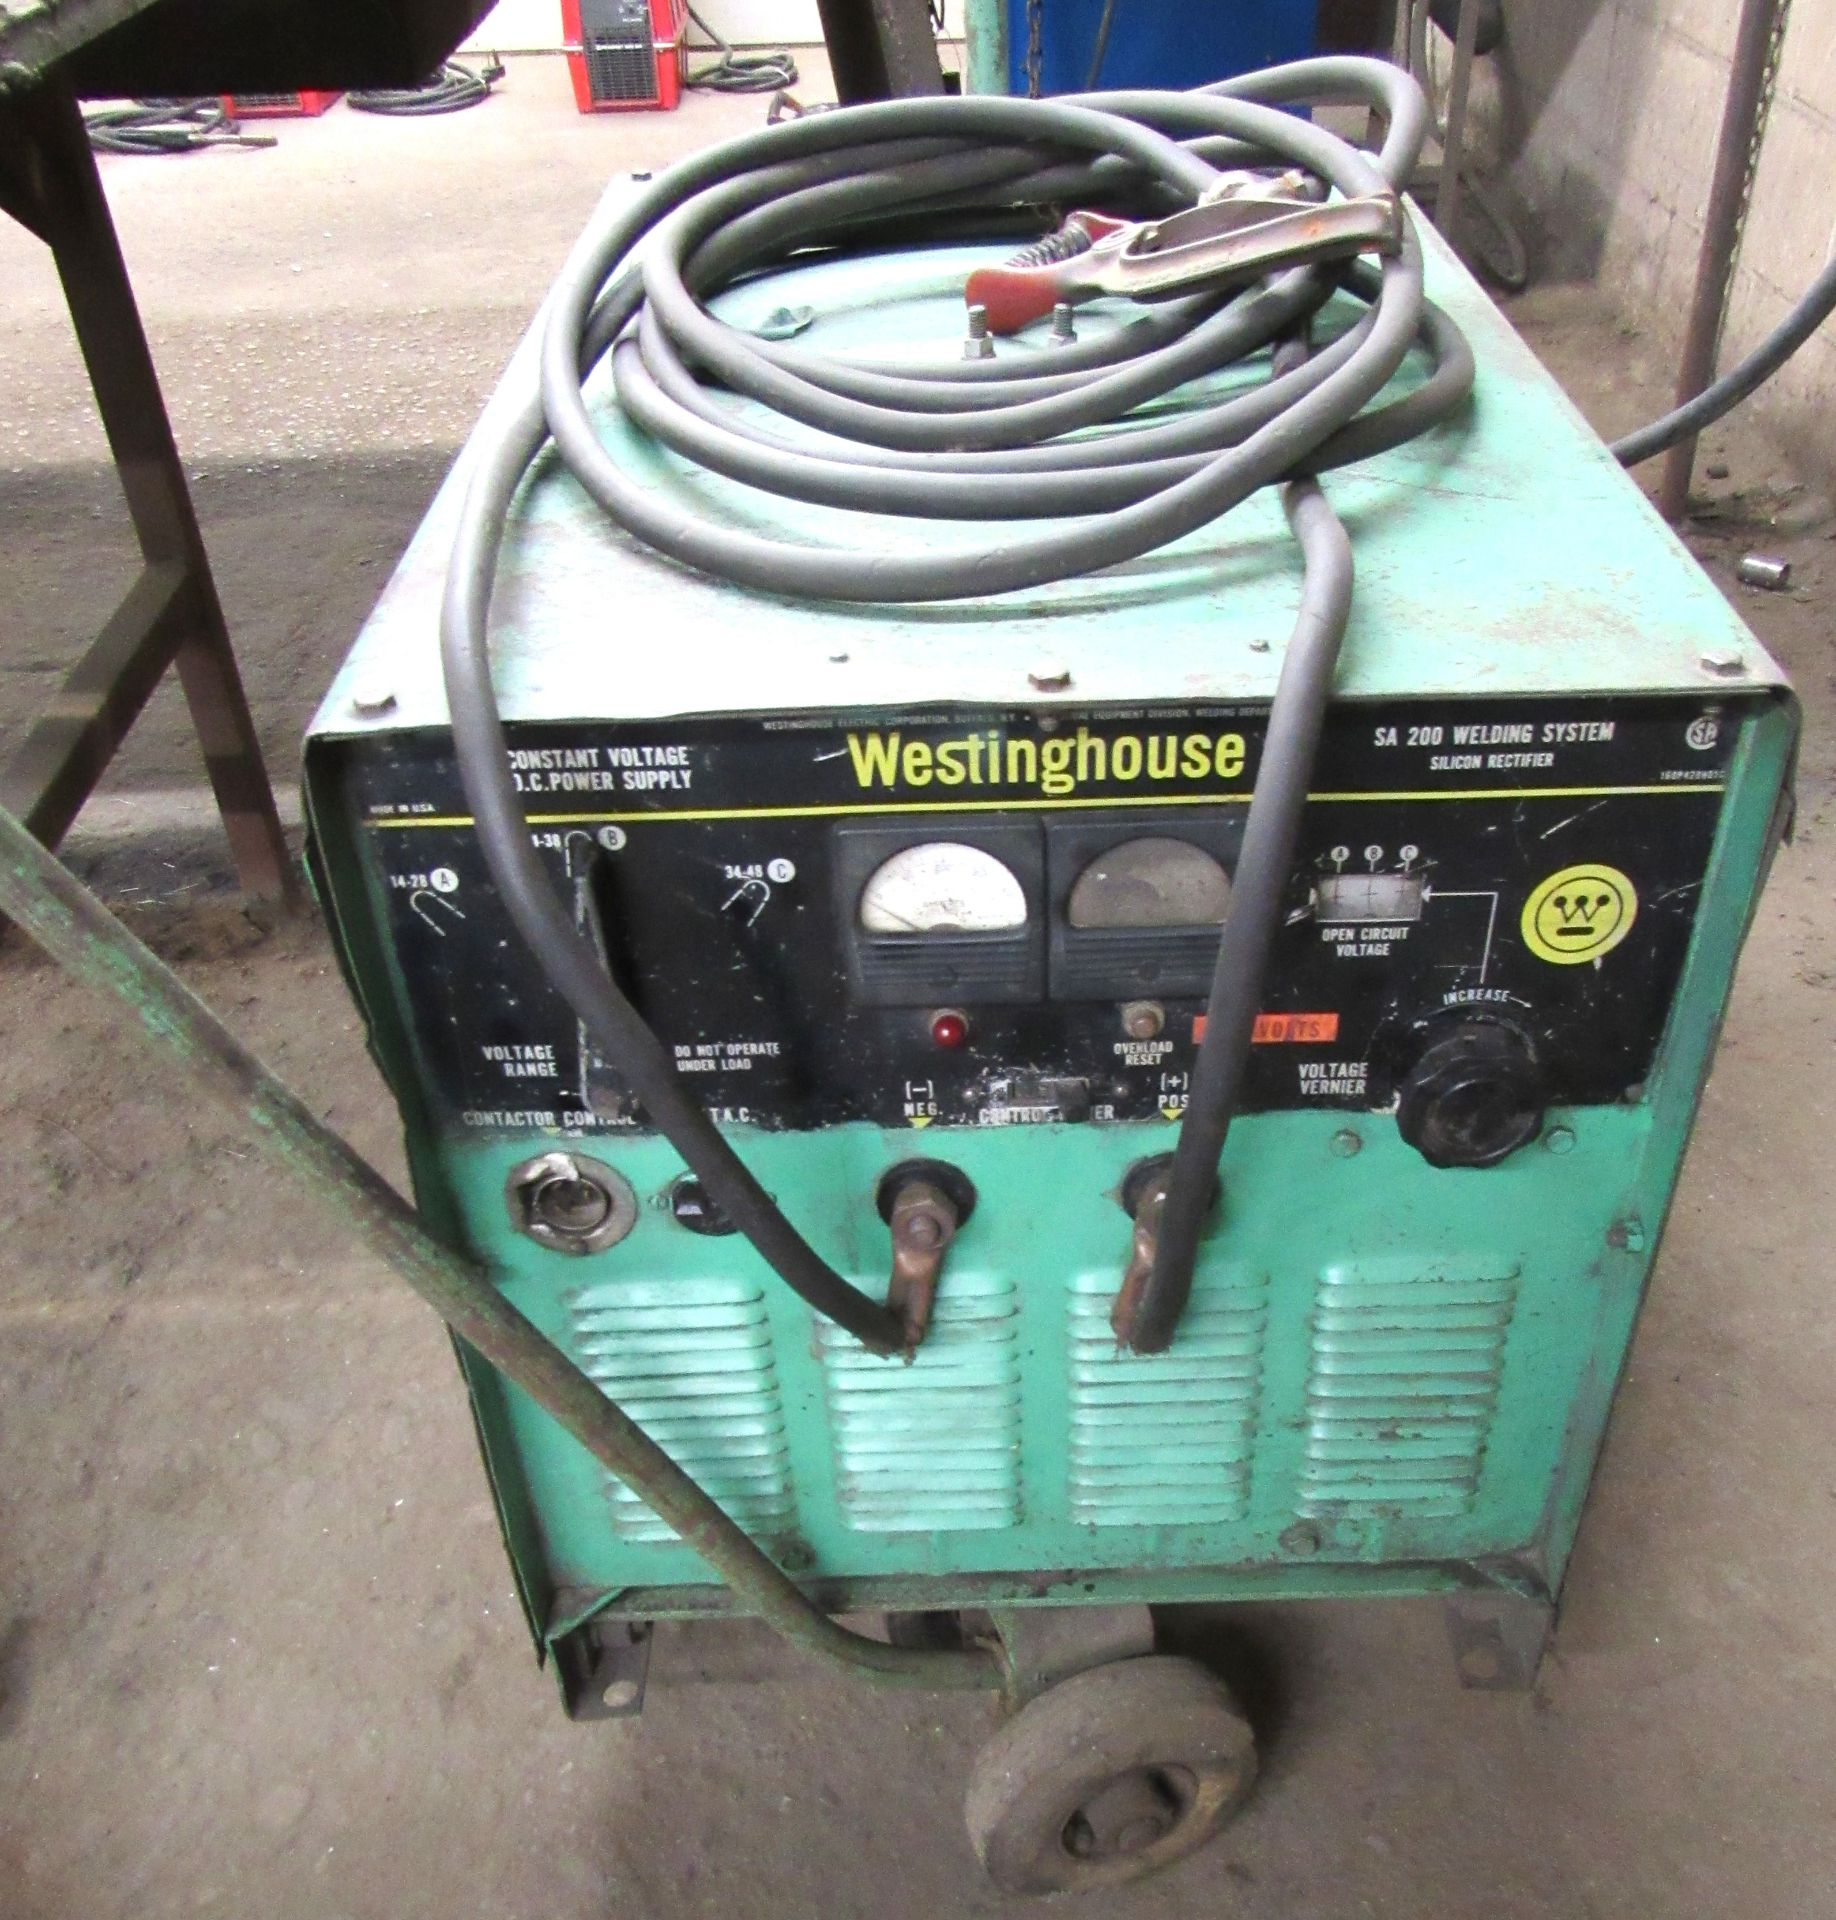 Westinghouse Type SA200 200 Amp DC Welder w/ Welding Cables